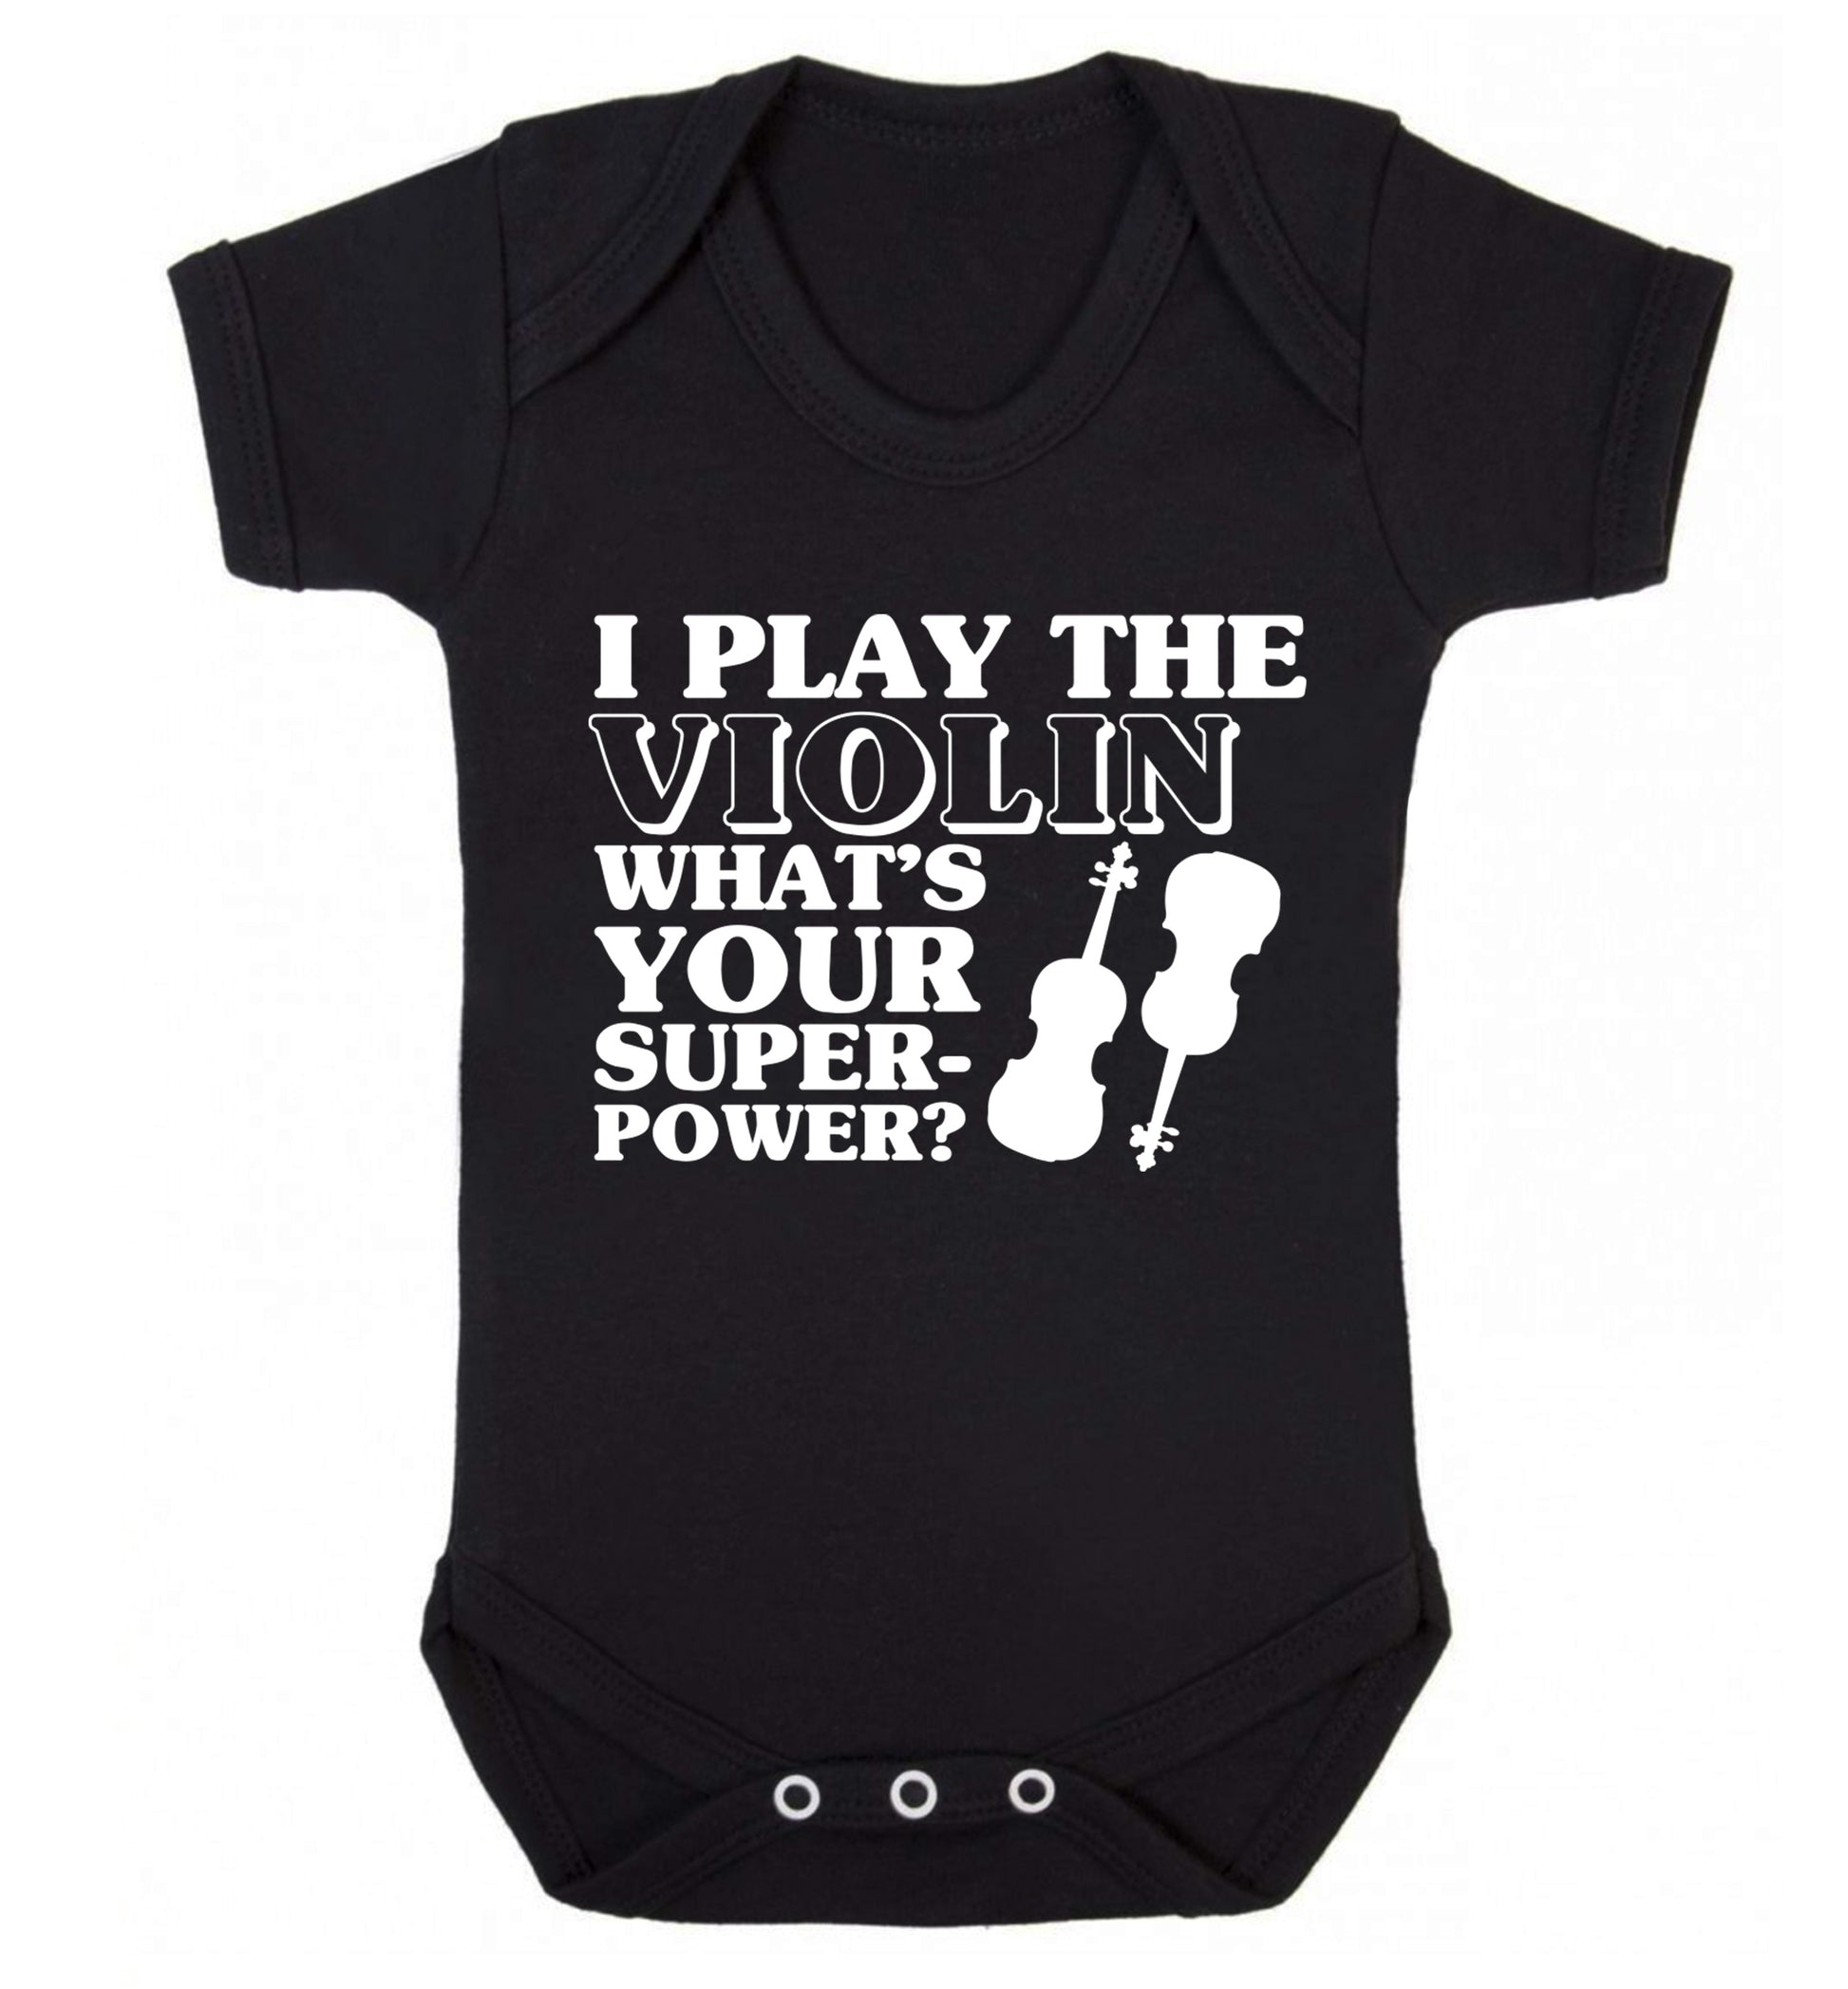 I Play Violin What's Your Superpower? Baby Vest black 18-24 months